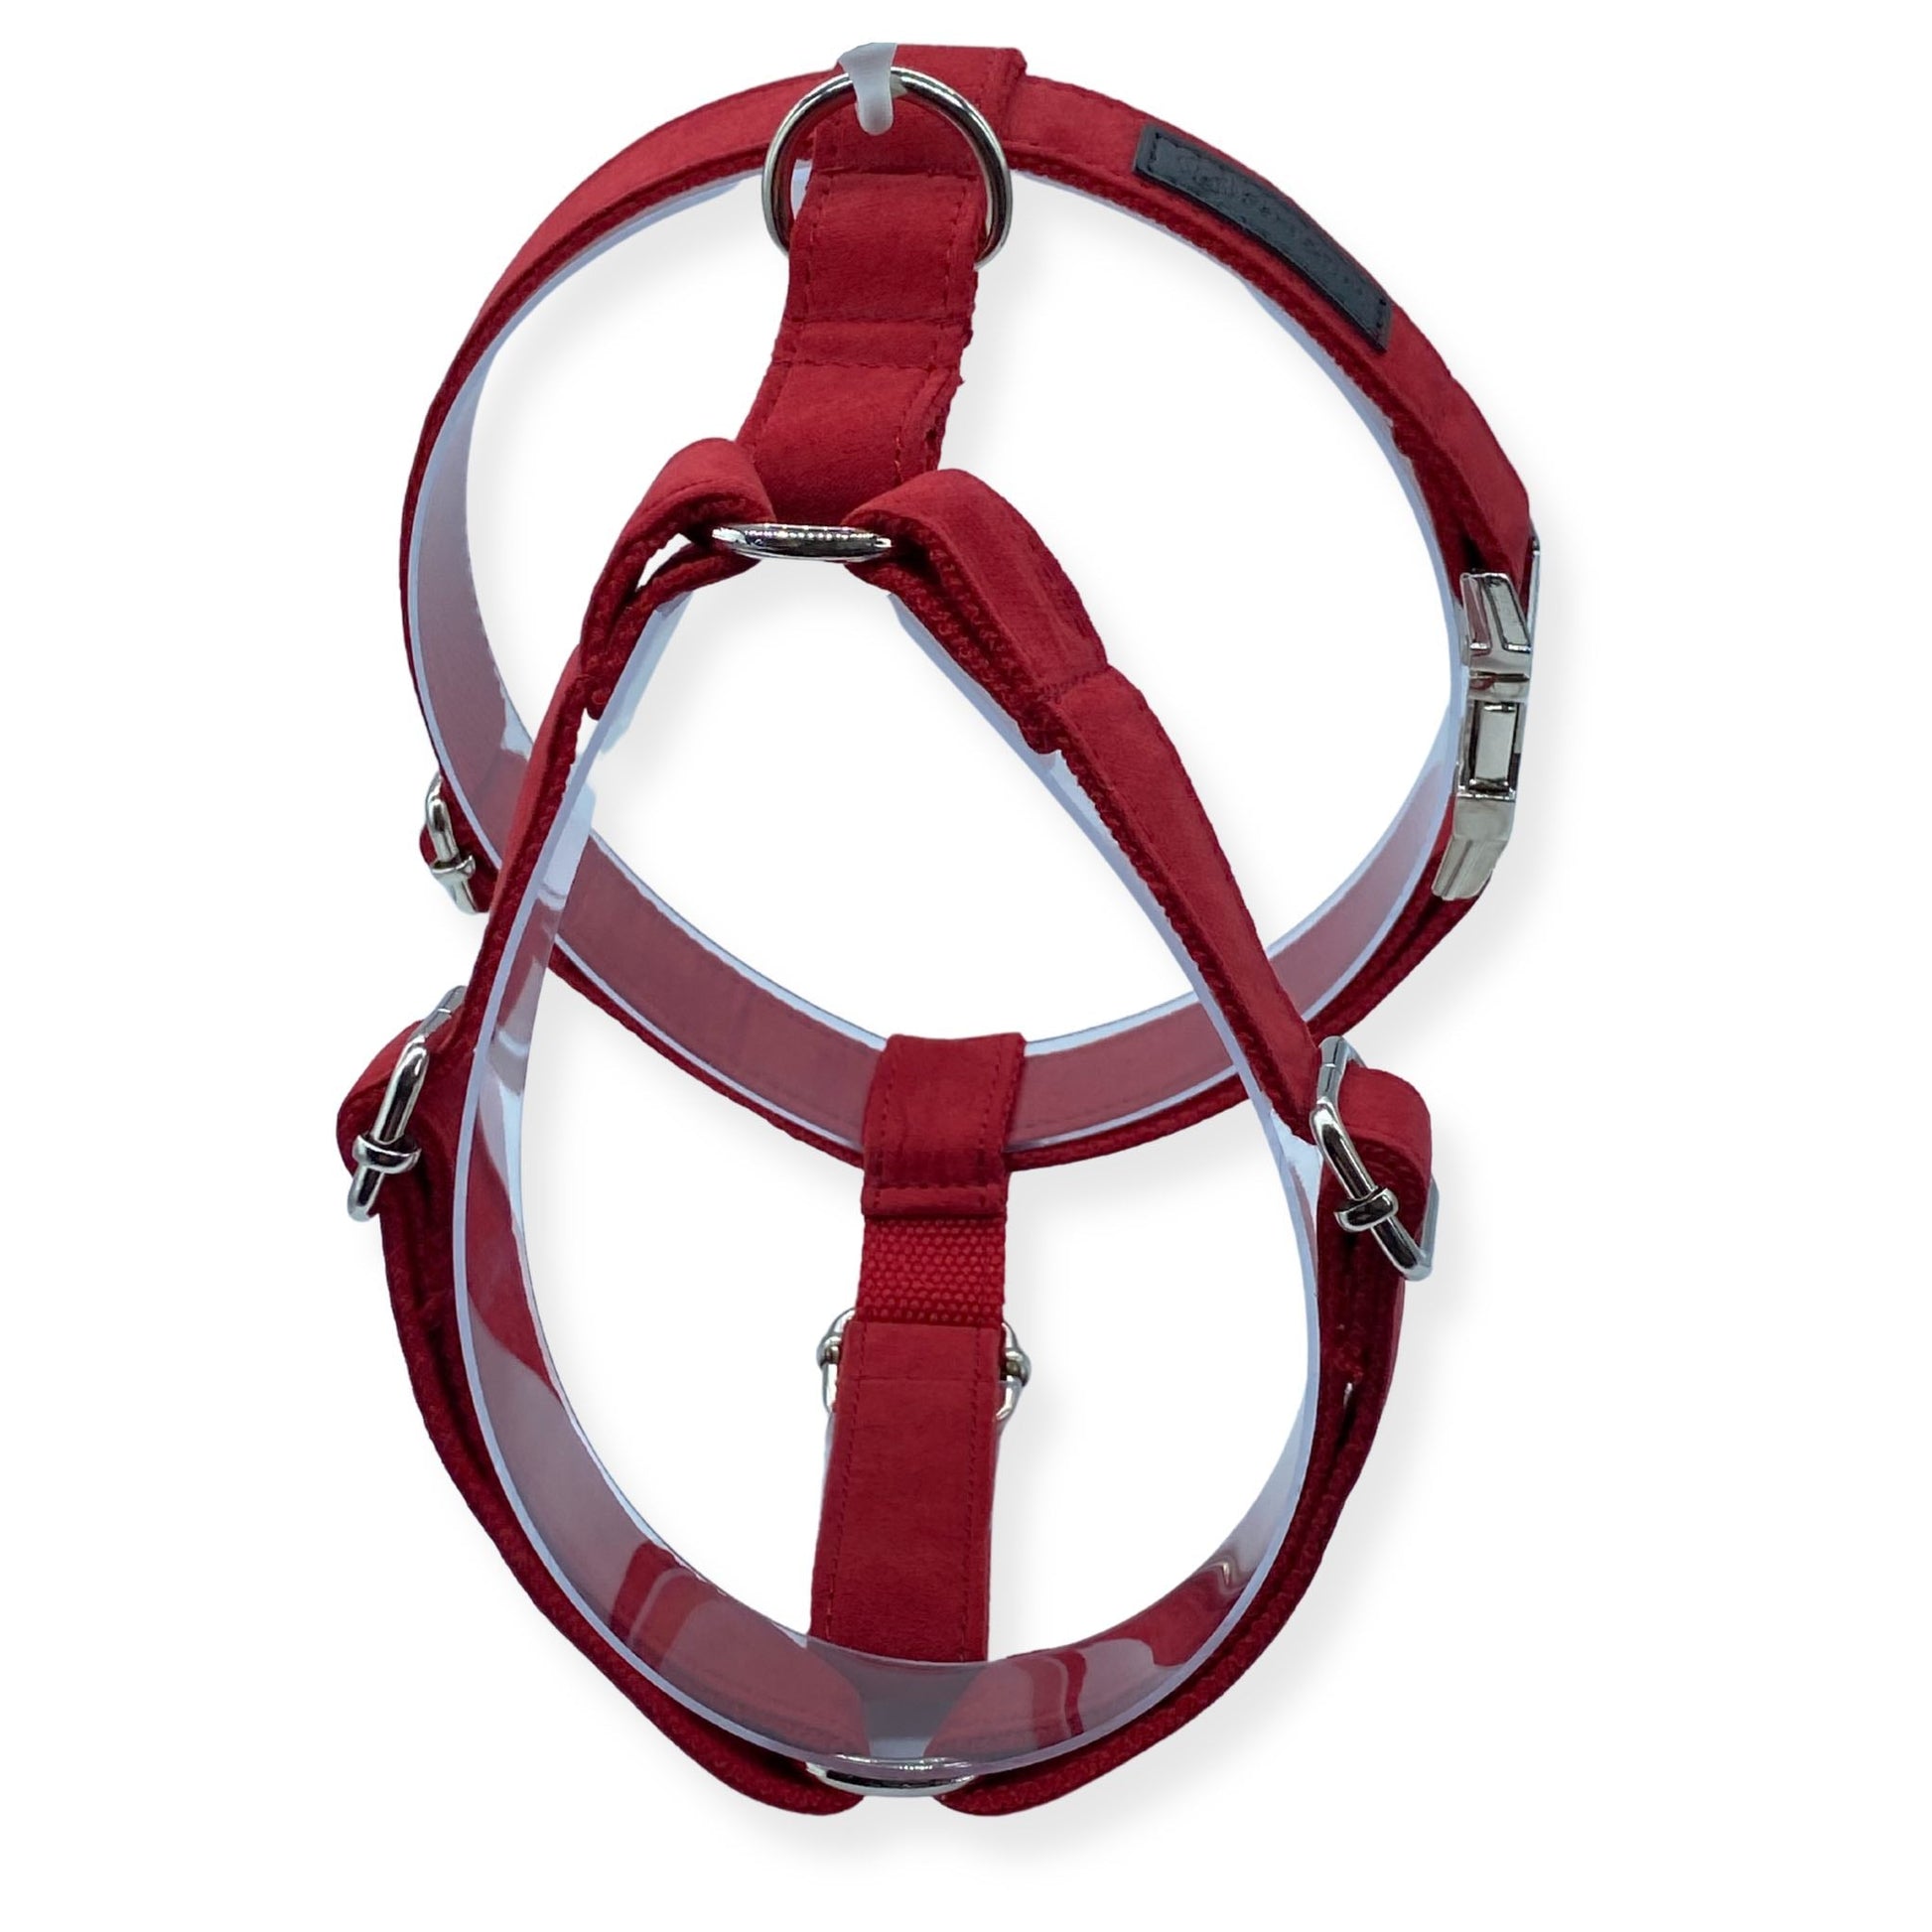 Fire Engine Red Customized Dog Harness - Sam and Dot